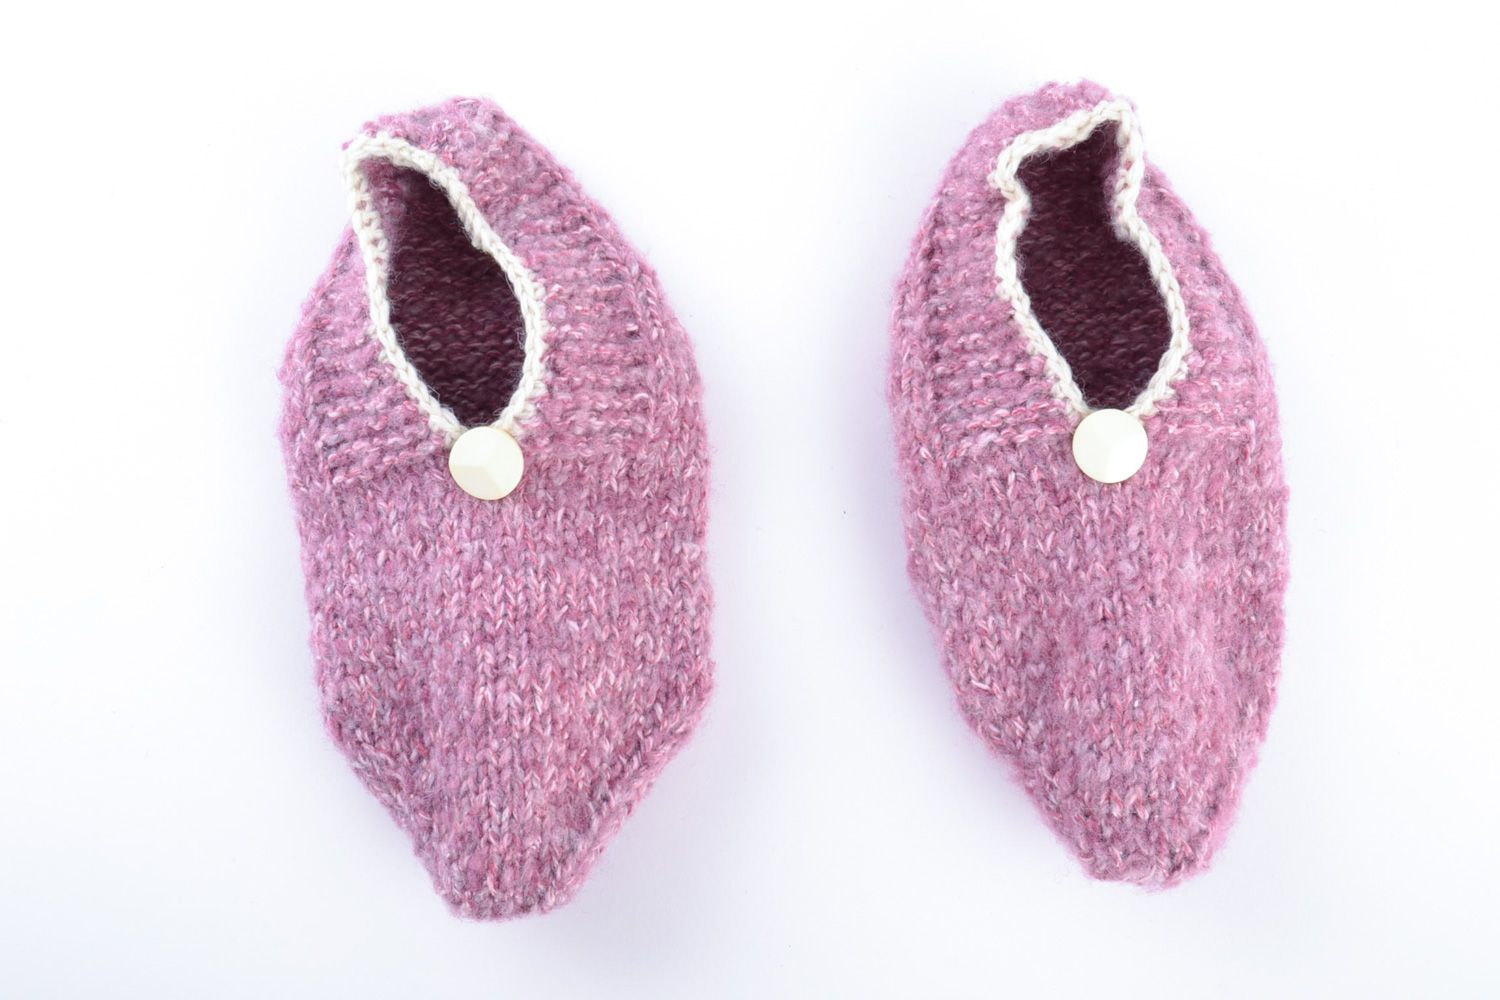 Cute warm violet handmade slippers knitted of semi-woolen yarns for women photo 2